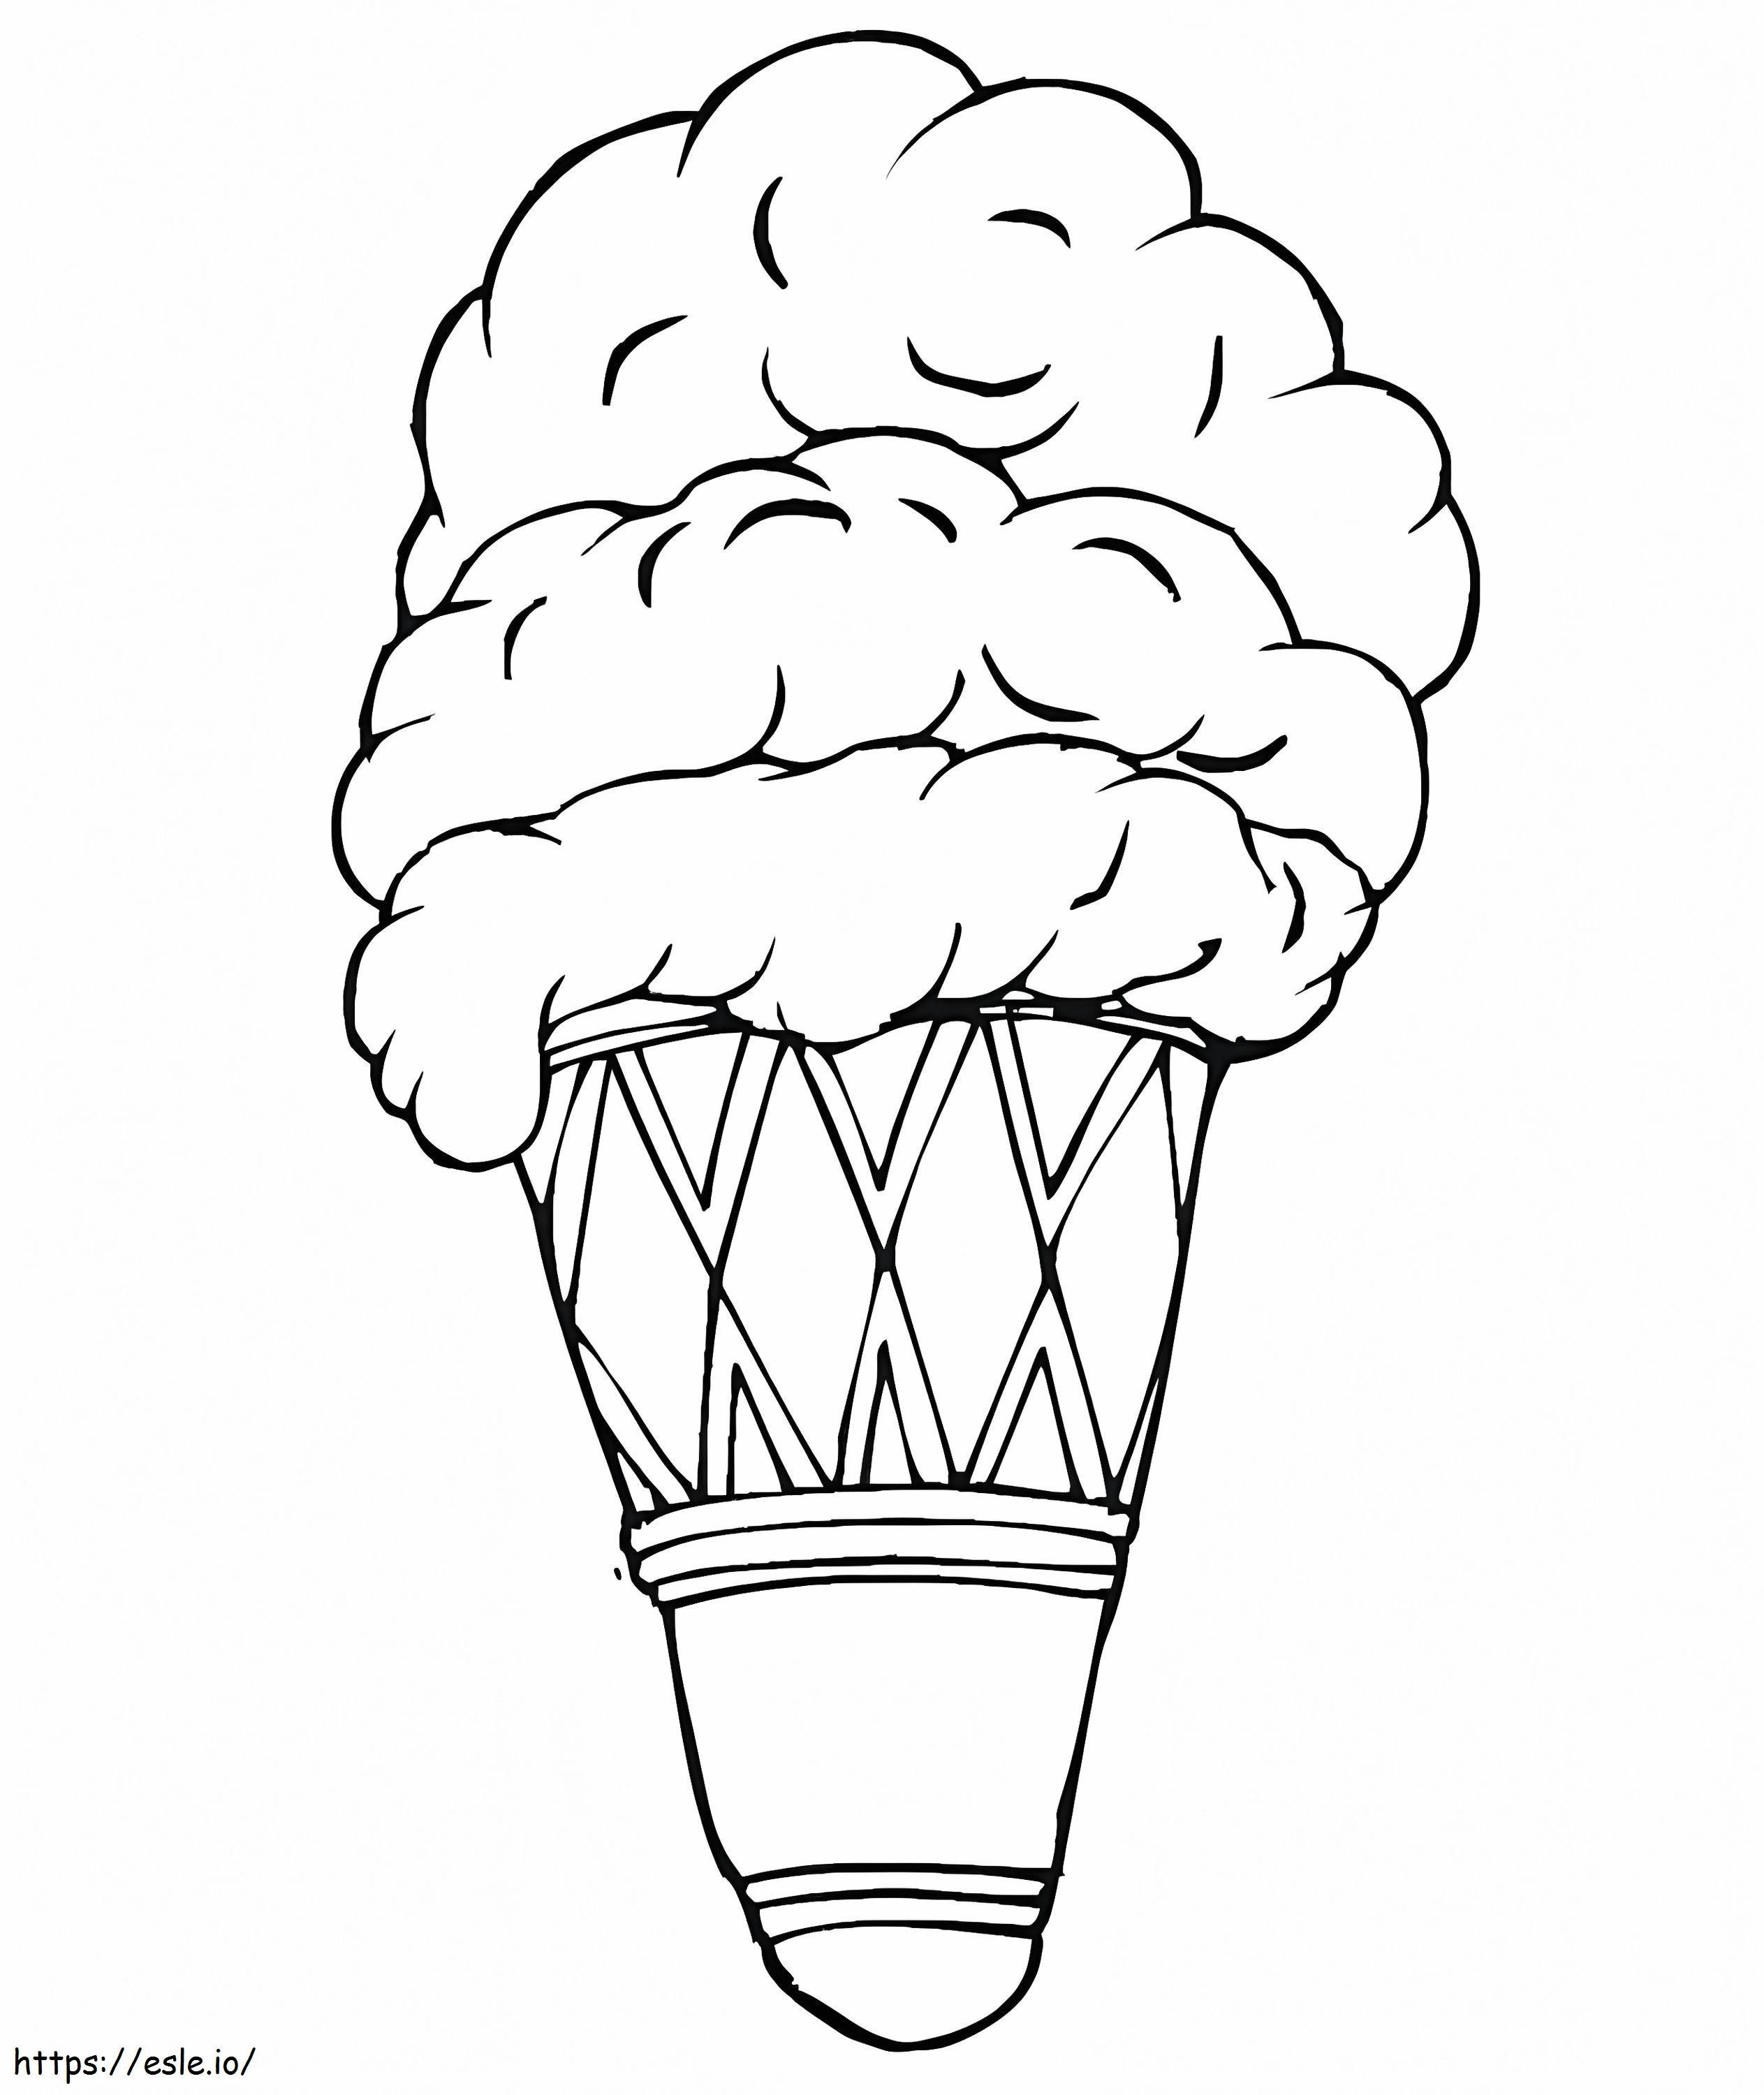 Ice Cream 16 coloring page